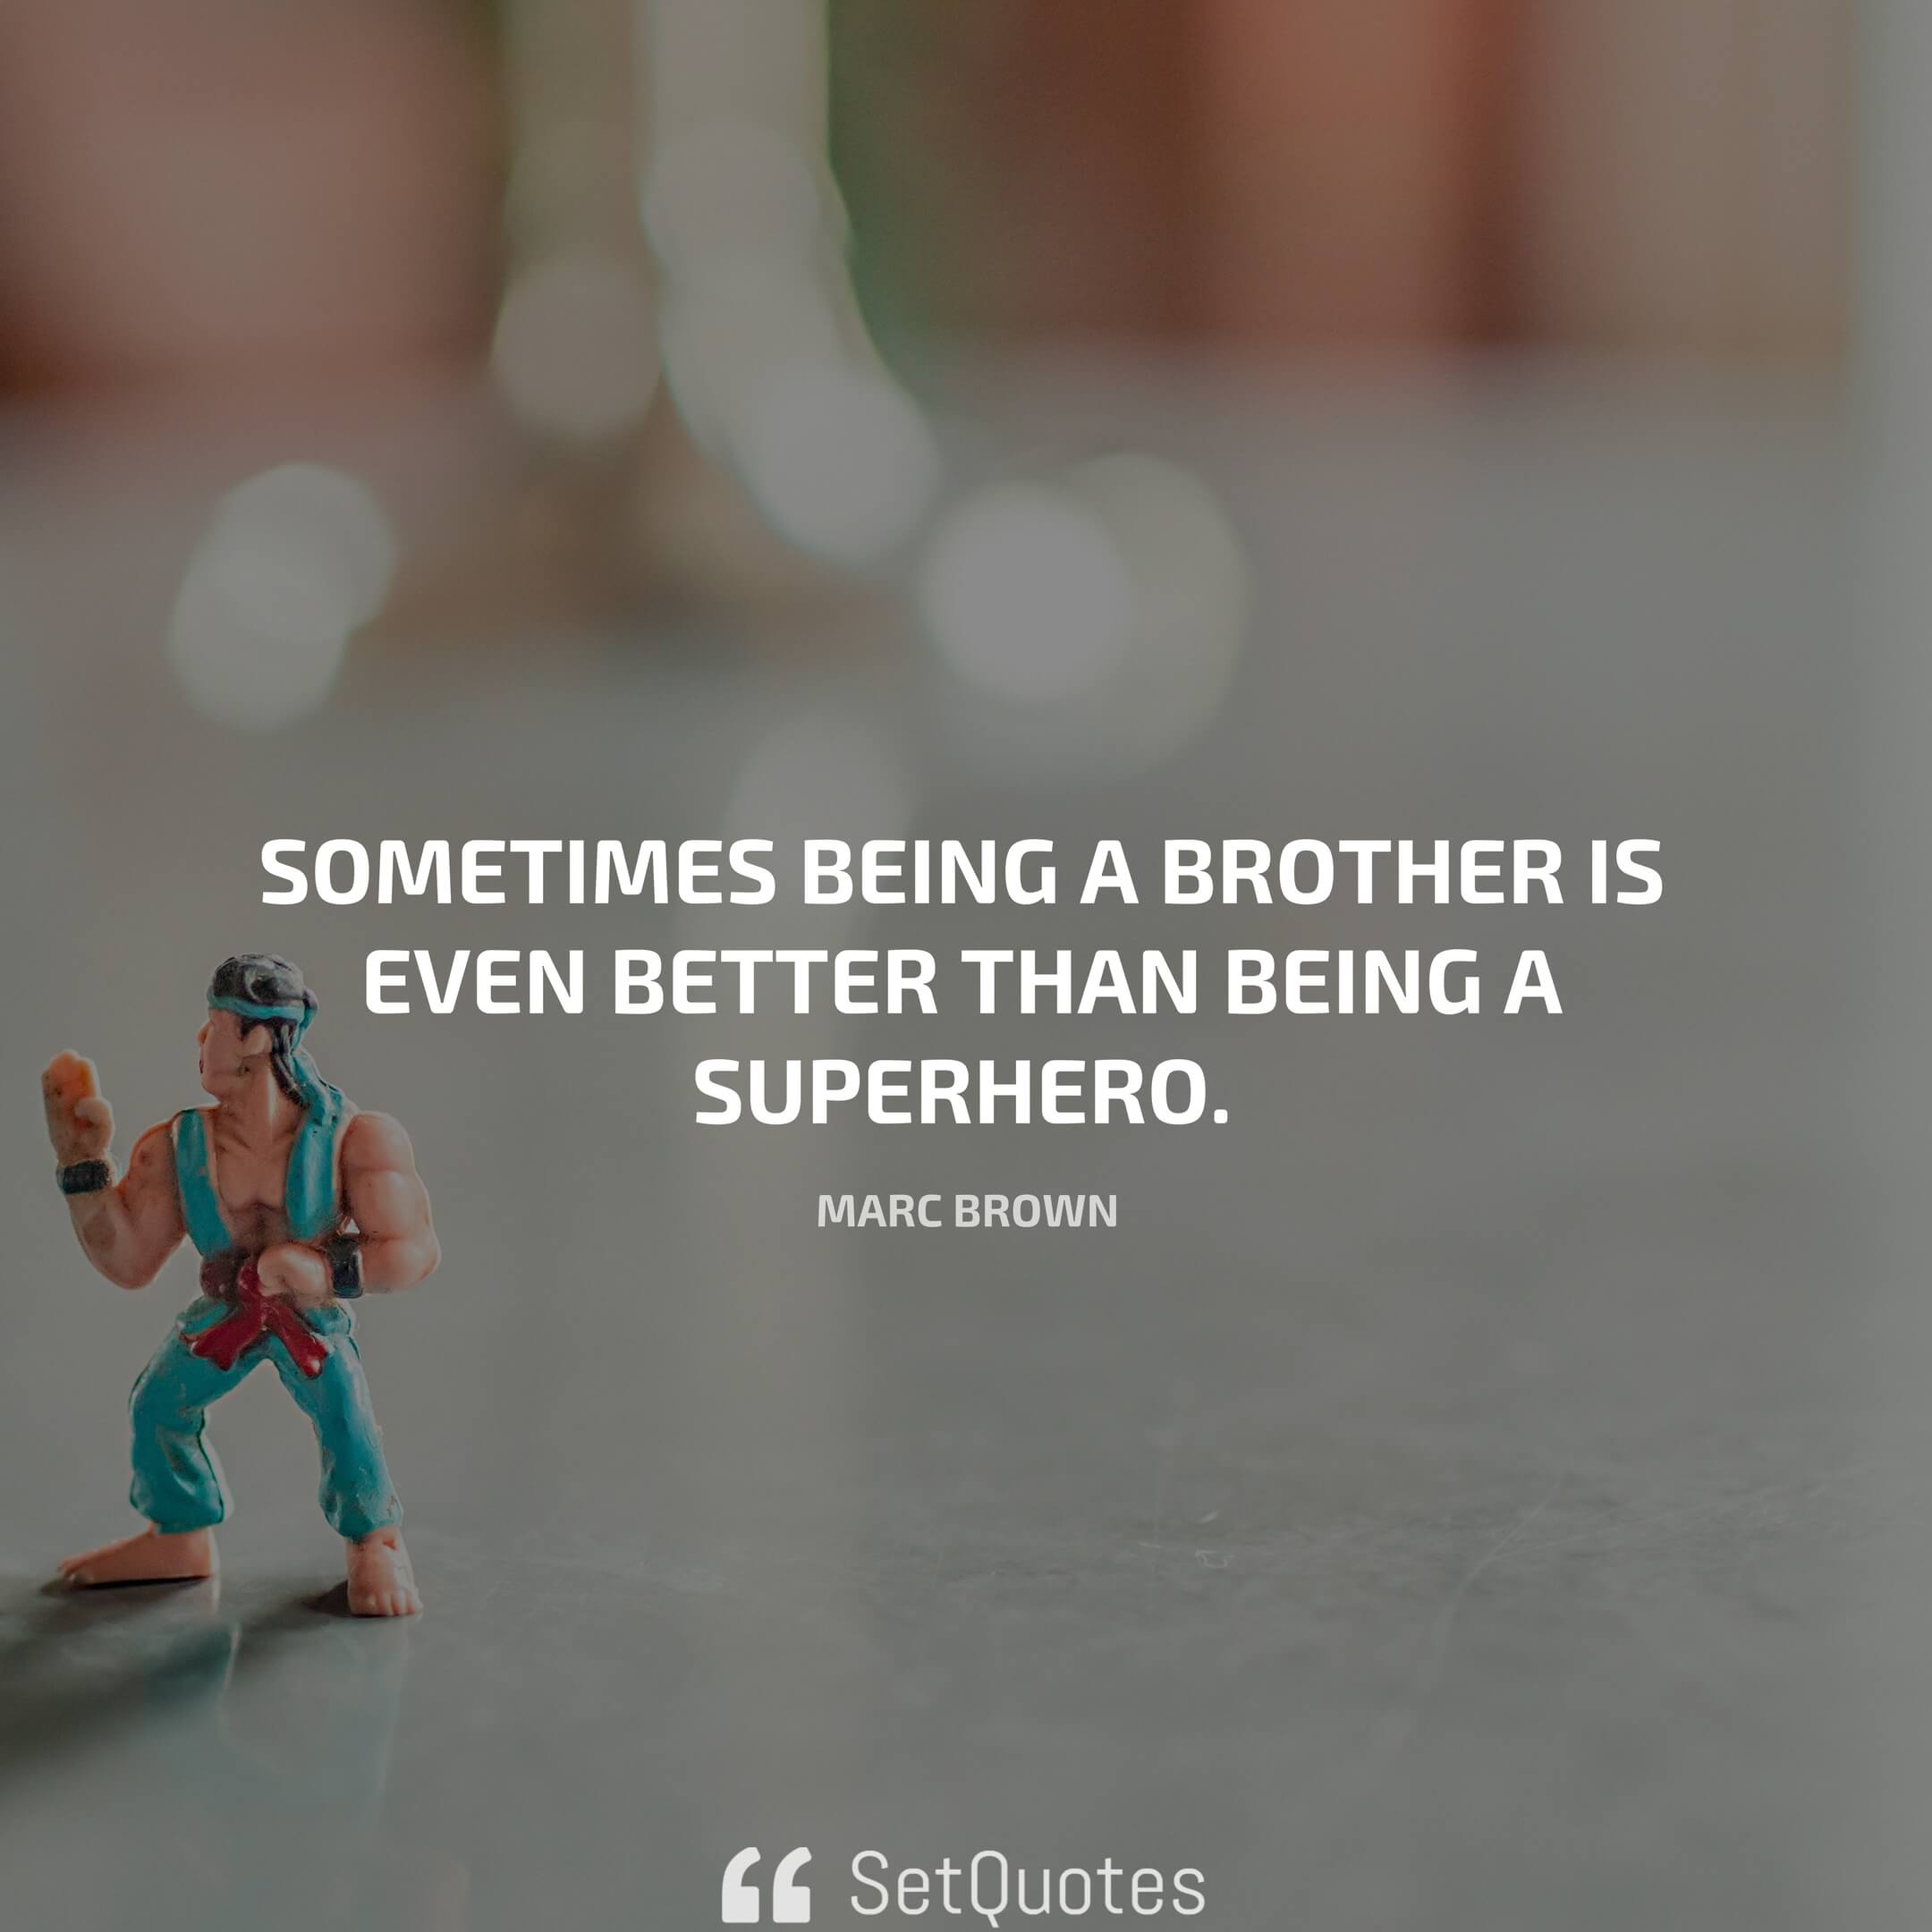 Sometimes being a brother is even better than being a superhero. – Marc Brown